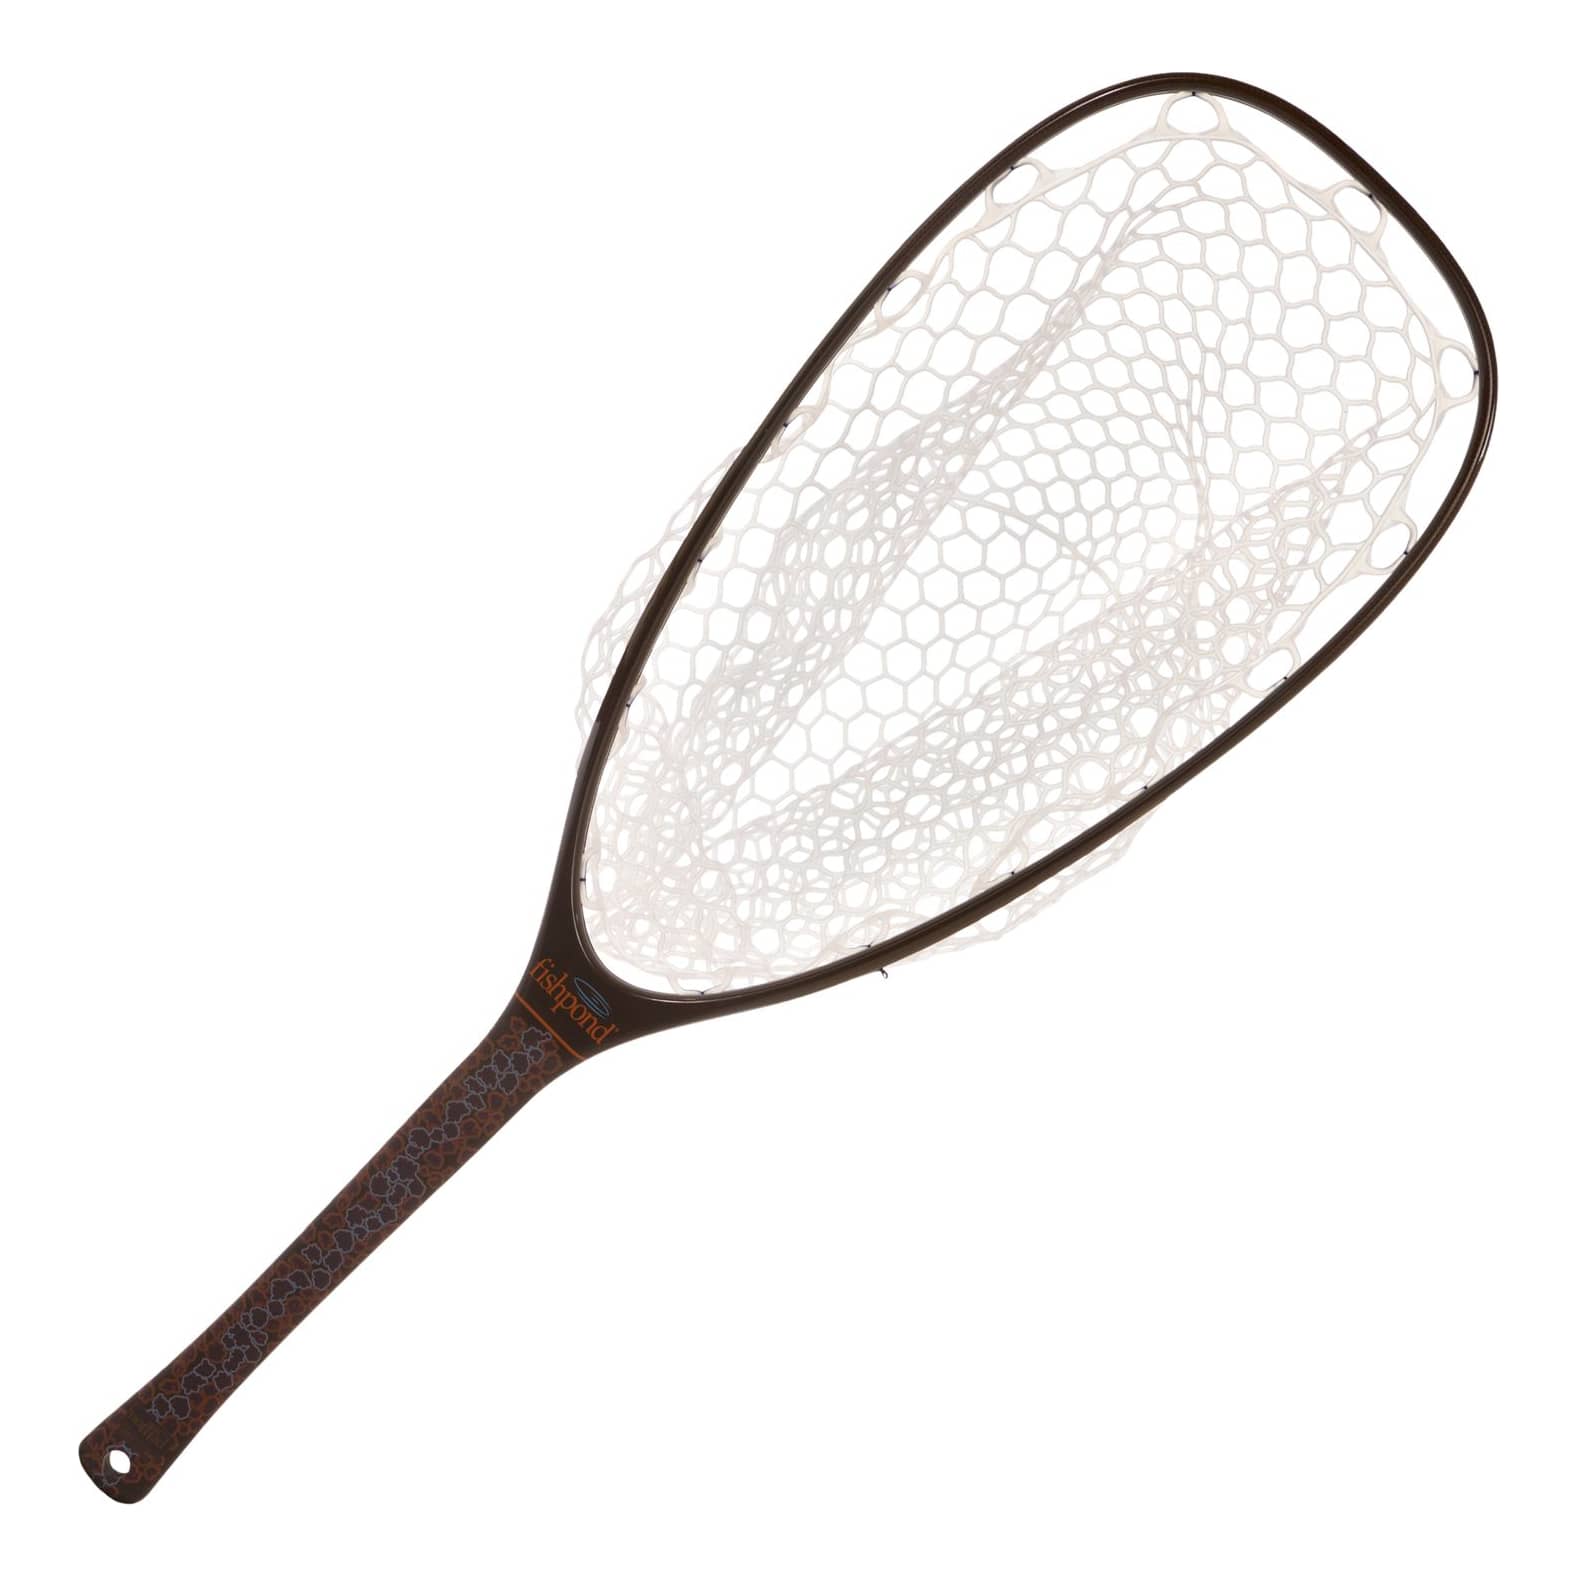 FISHPOND NOMAD EMERGER NET brown trout